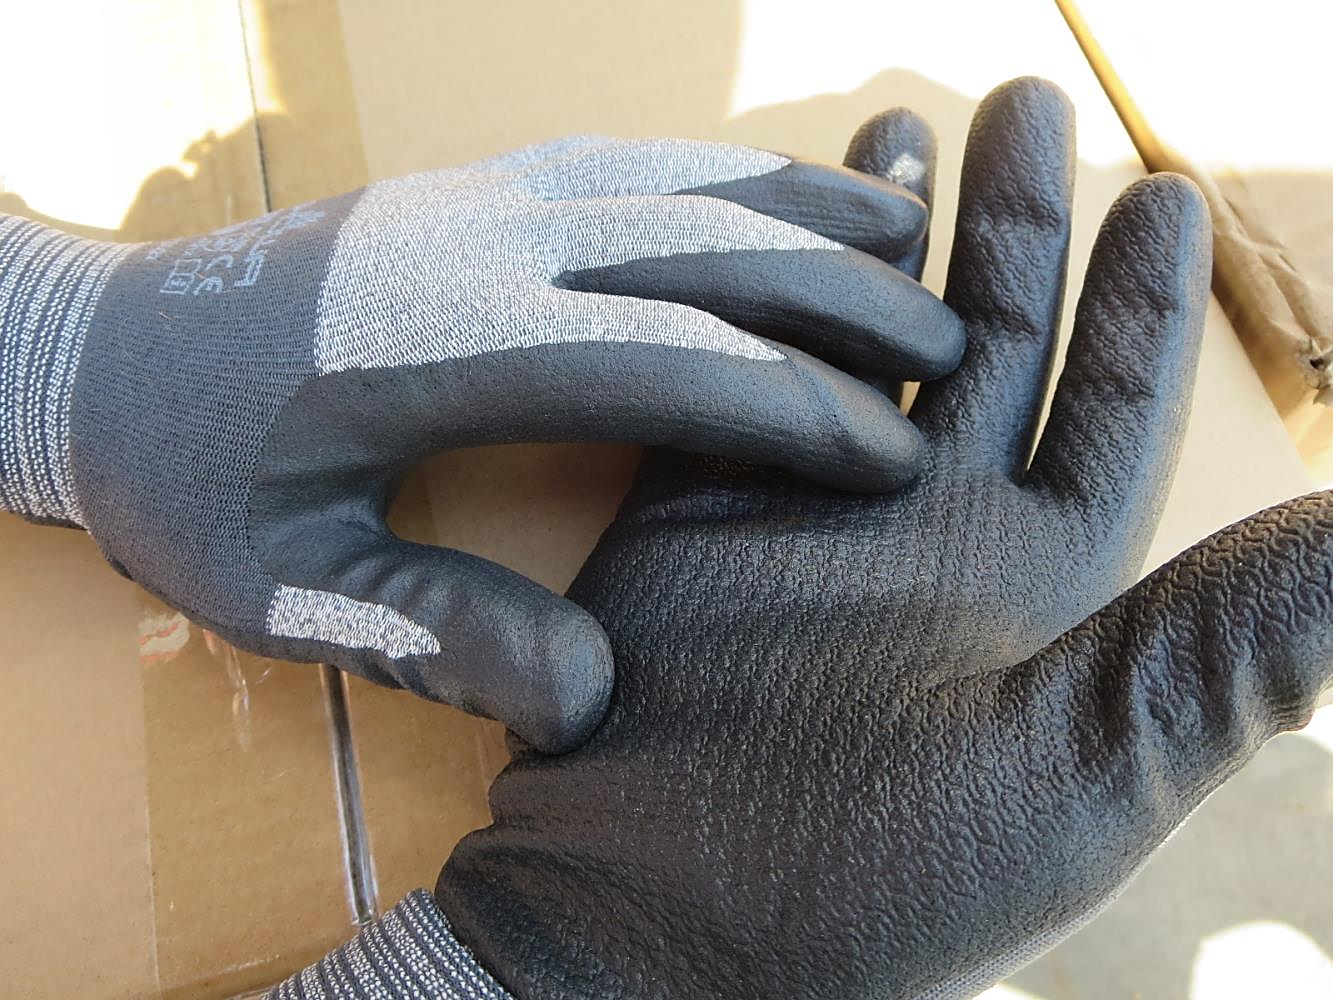 SHOWA 381 Ultra-Lightweight Microfiber Gloves with Microporous Nitrile  Coating